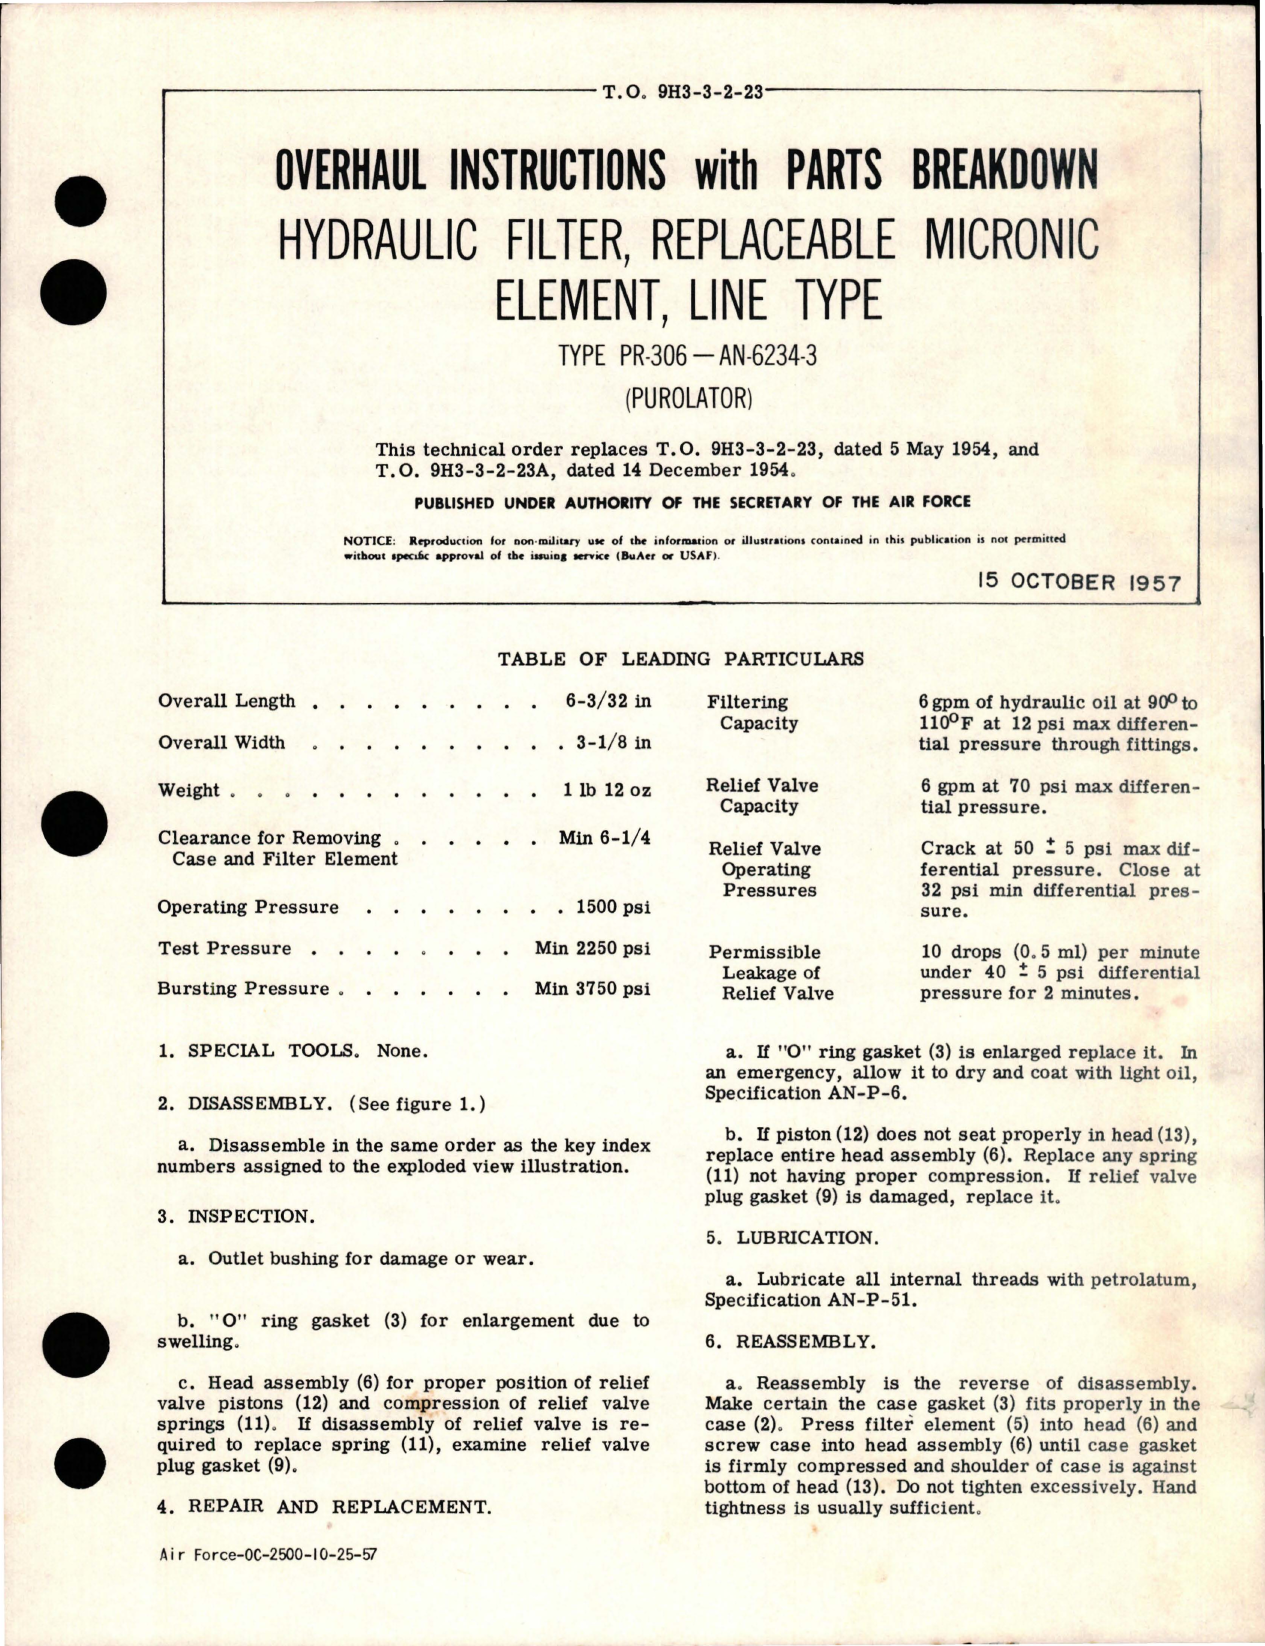 Sample page 1 from AirCorps Library document: Overhaul Instructions with Parts for Replaceable Micronic Element Line Type Hydraulic Filter - Type PR-306, AN-6234-3